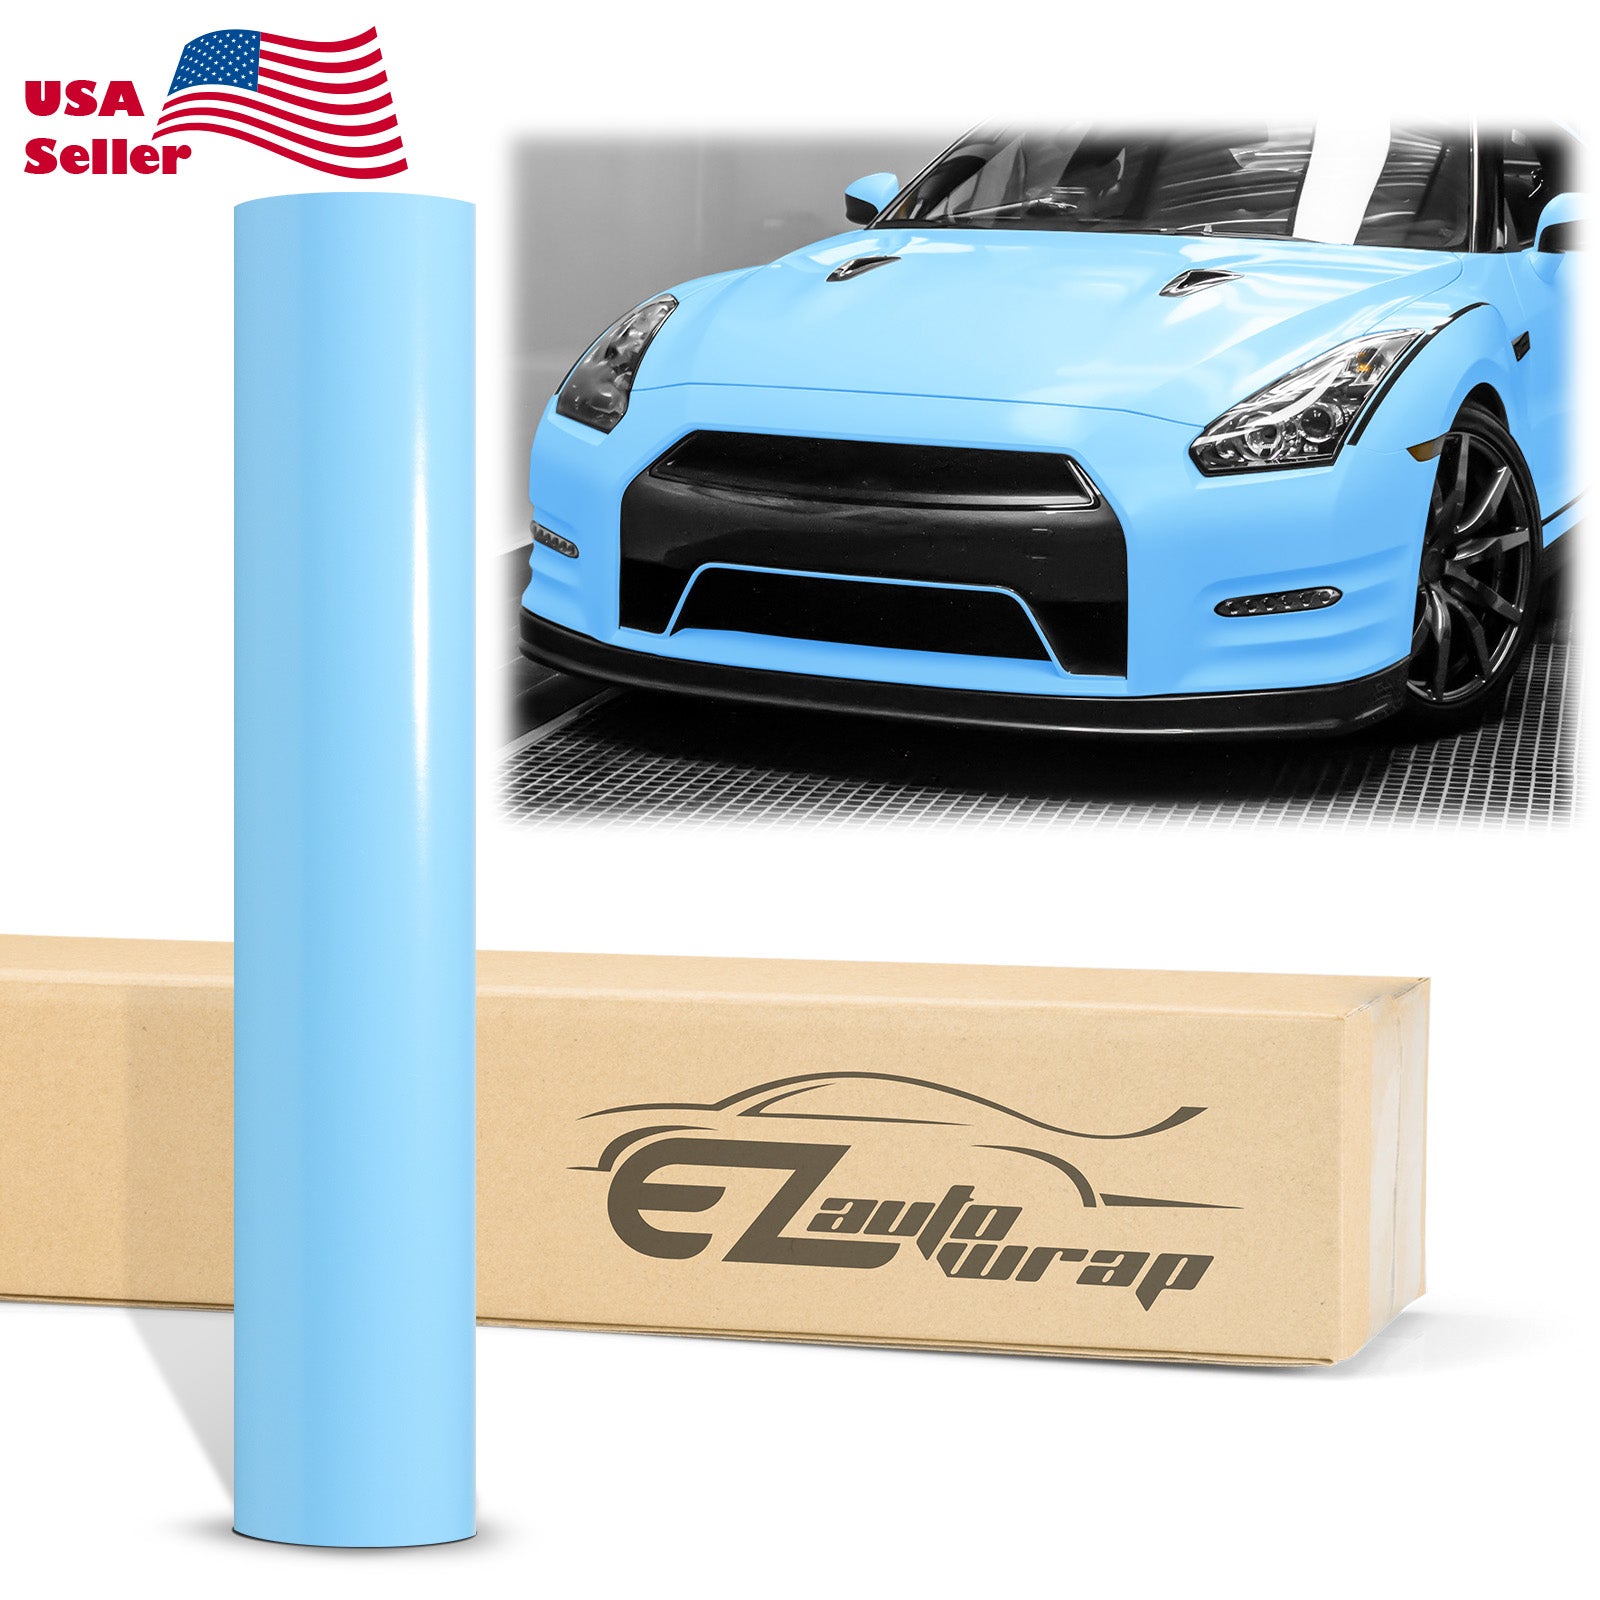 EZAUTOWRAP Blue Night Reflective Vinyl Wrap Sticker Decal Graphic Sign Self  Adhesive Film Roll For Car Vehicle Boat Truck Trailer RV Motorcycle Bike  Road Sign Party Club Decoration 